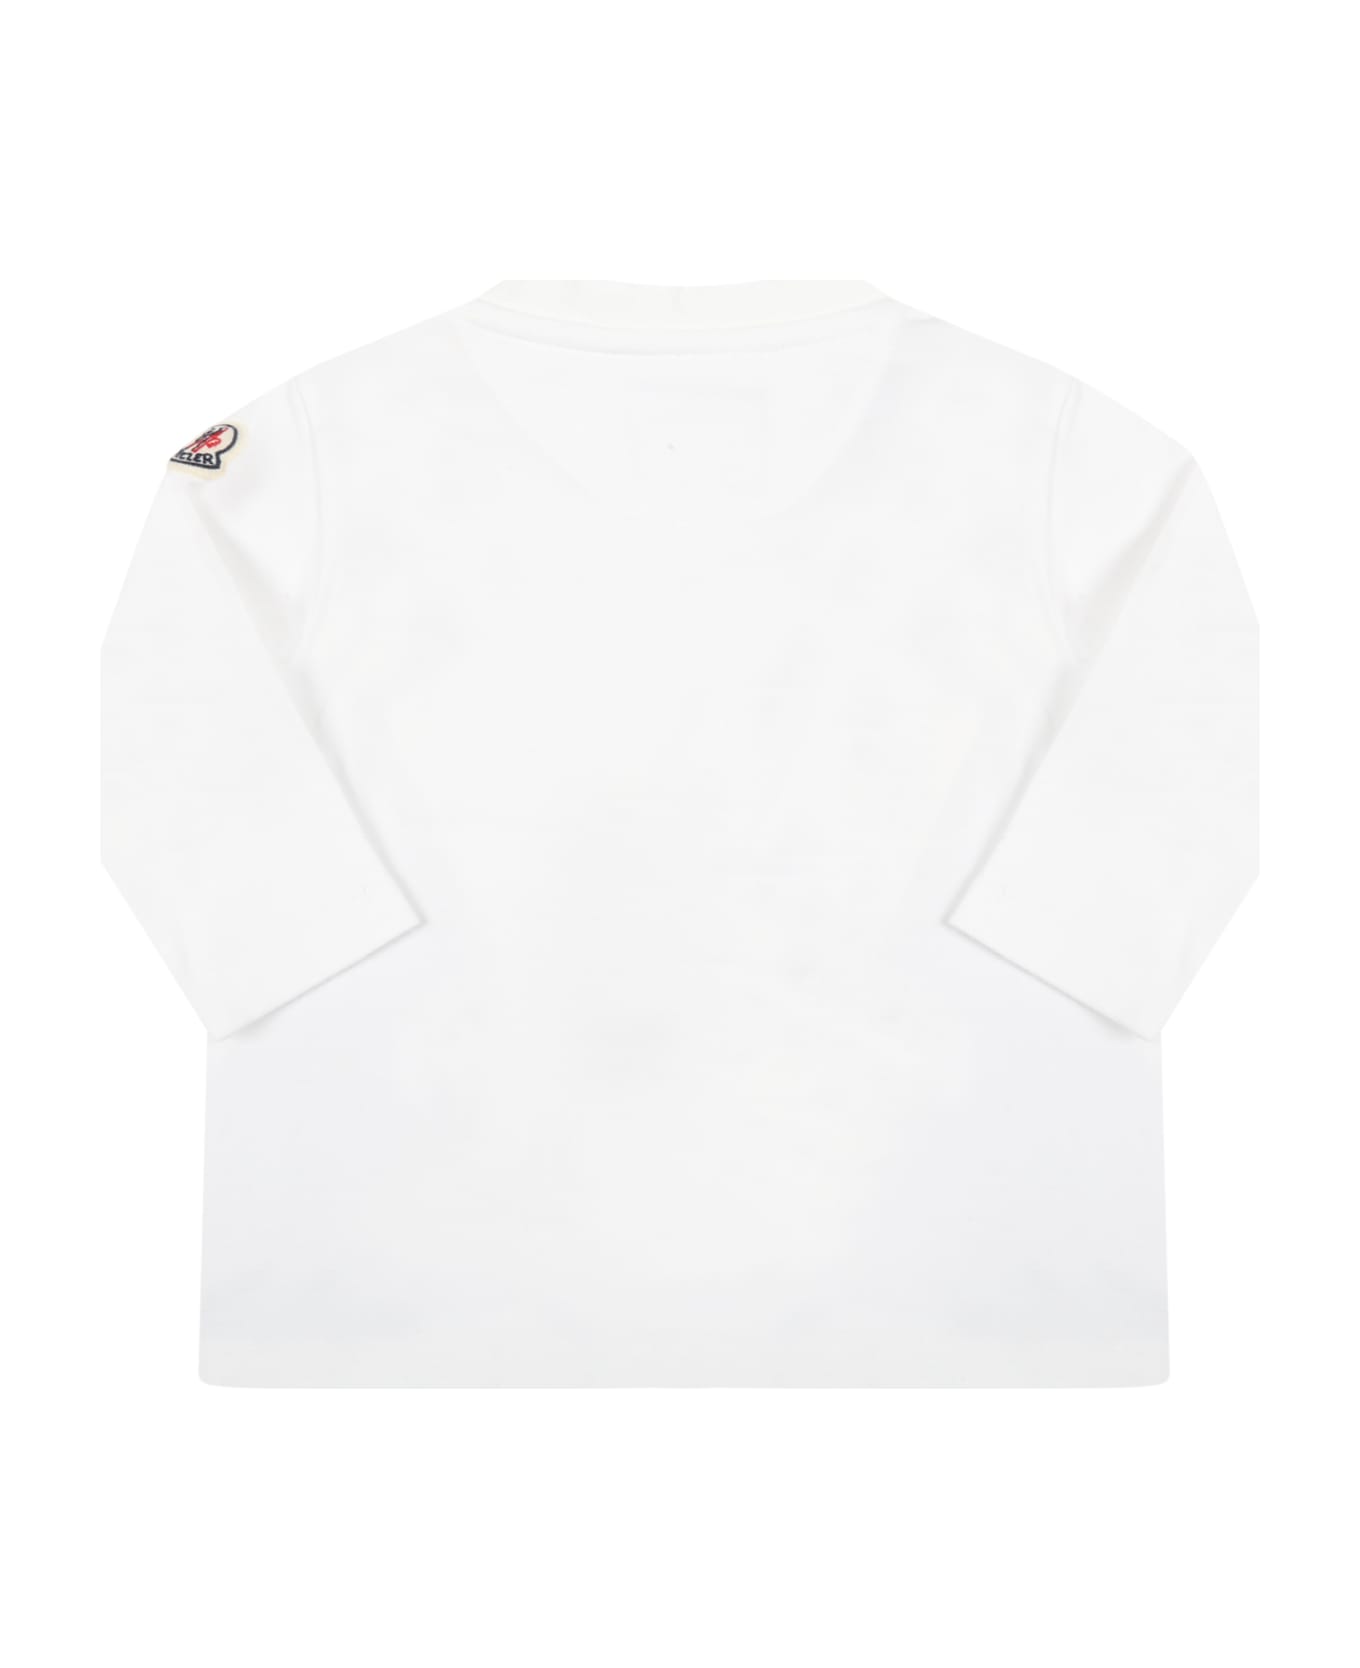 Moncler White T-shirt For Baby Boy With Spiderman - White